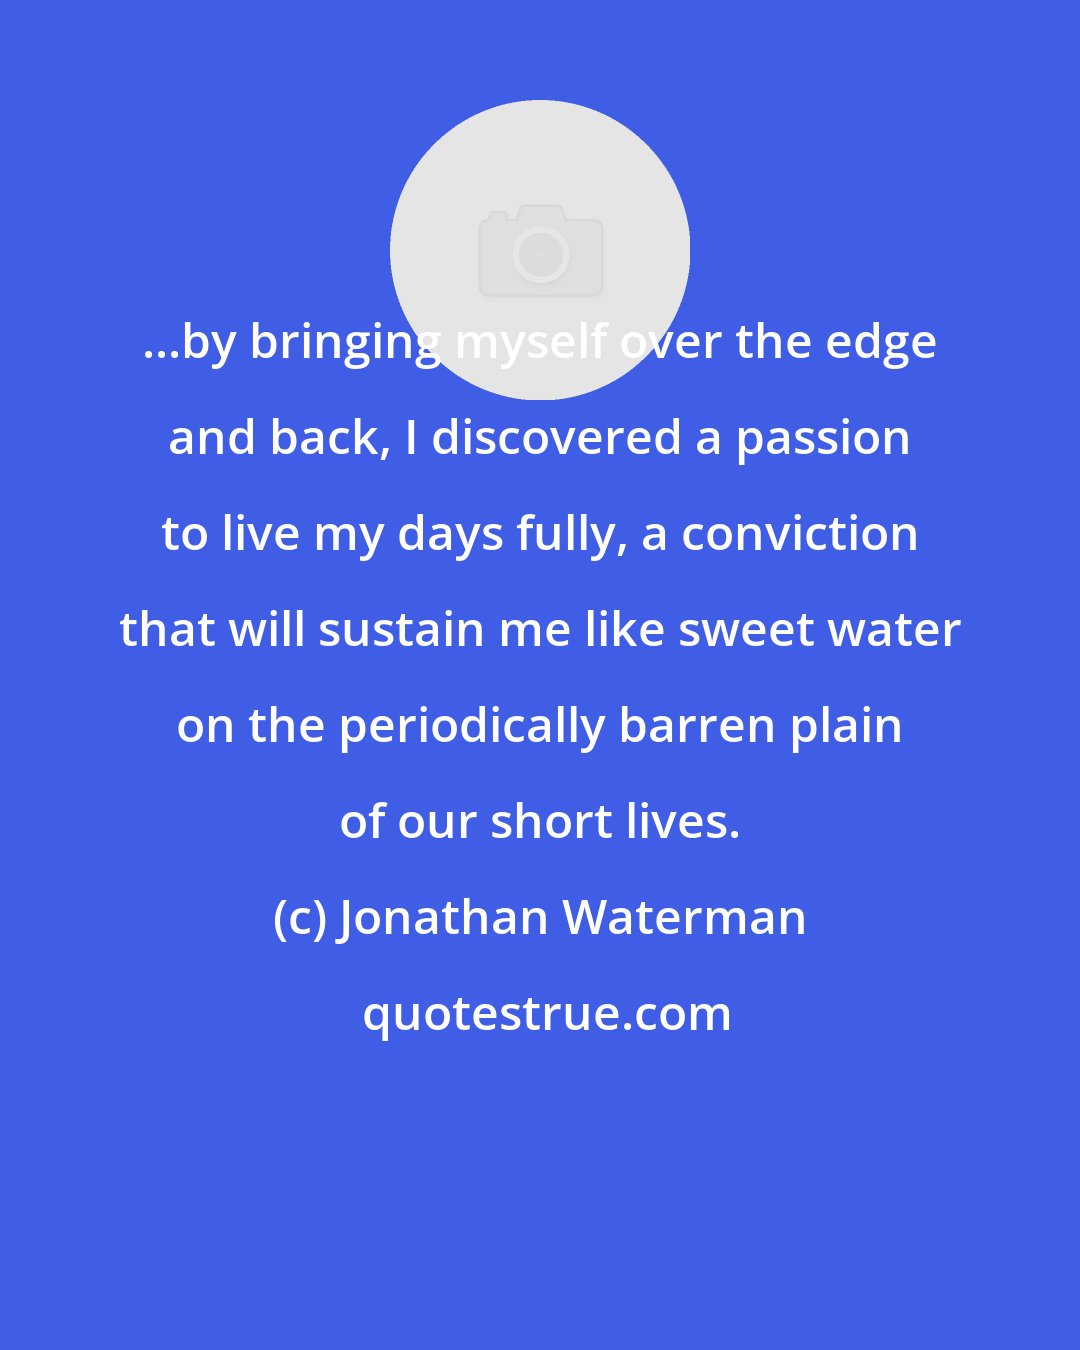 Jonathan Waterman: ...by bringing myself over the edge and back, I discovered a passion to live my days fully, a conviction that will sustain me like sweet water on the periodically barren plain of our short lives.